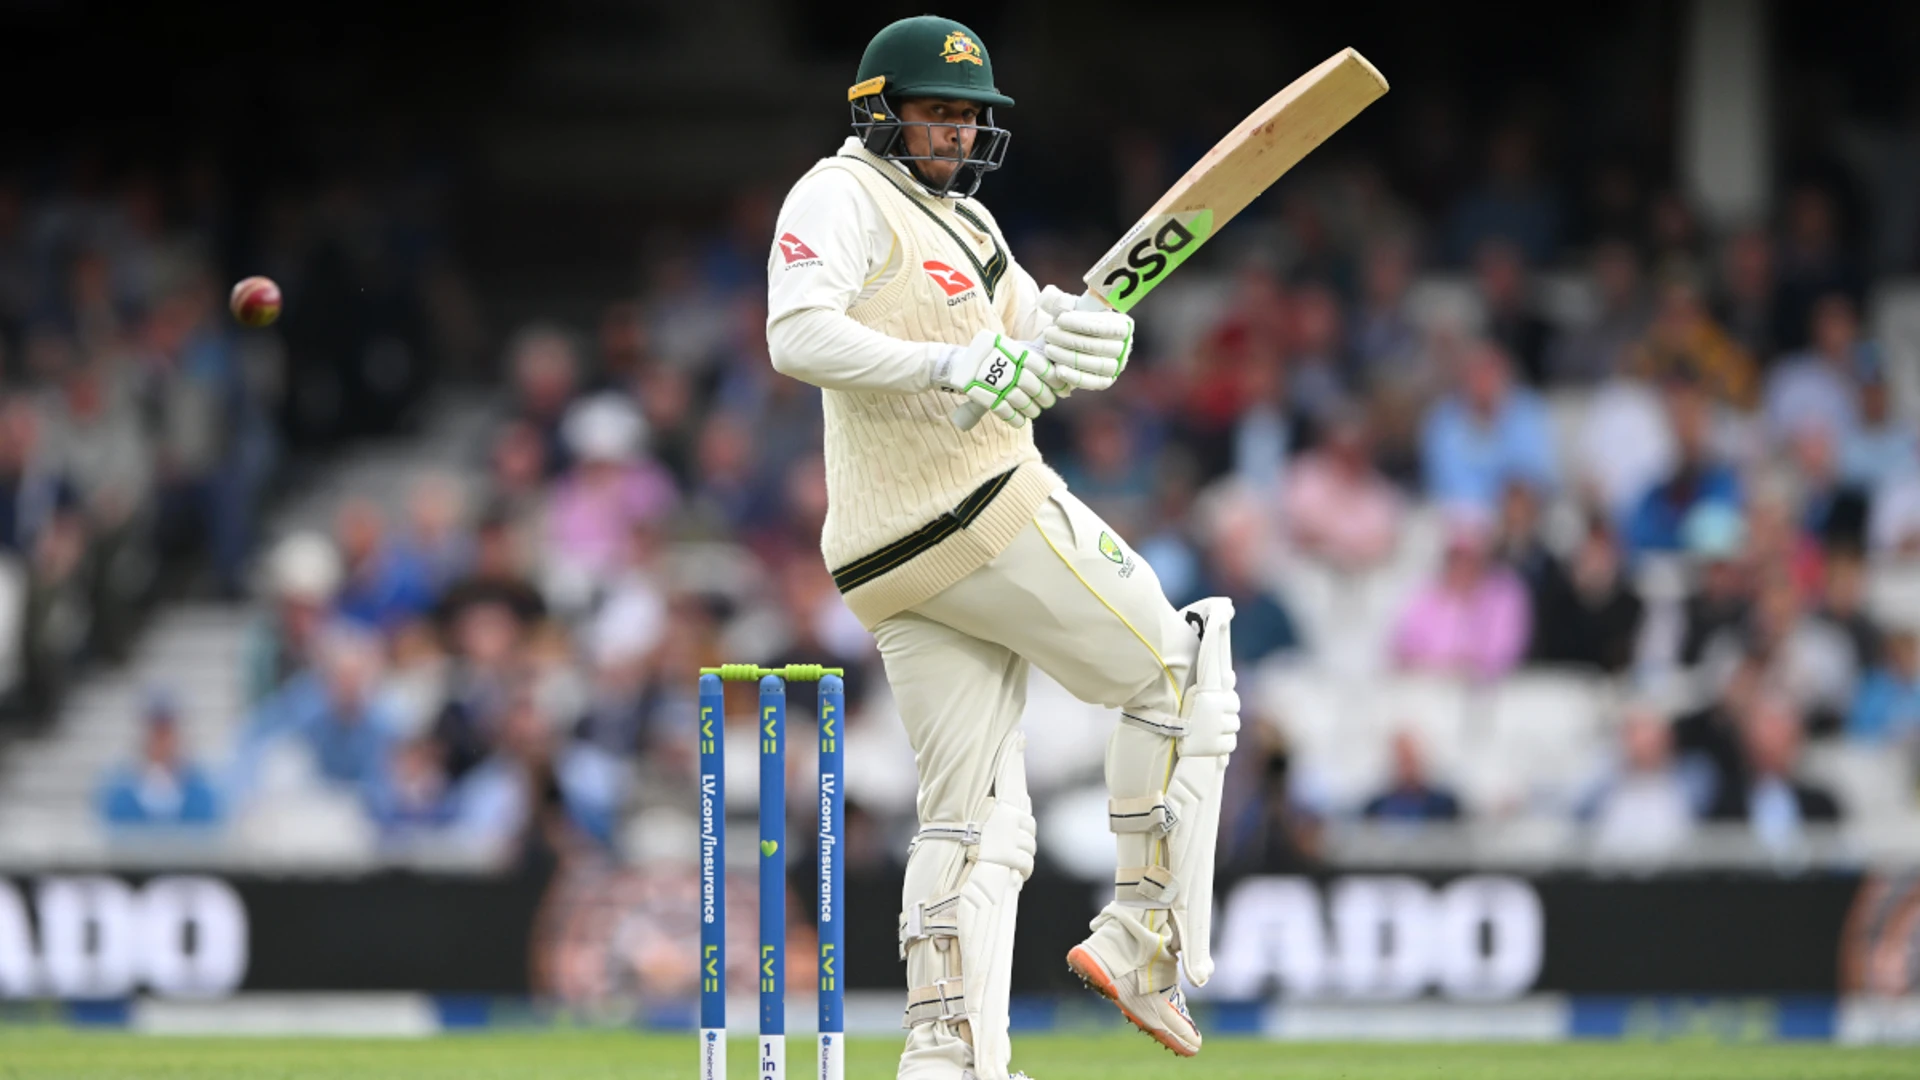 Australia's Khawaja laments 'frustrating' ball change in Ashes finale